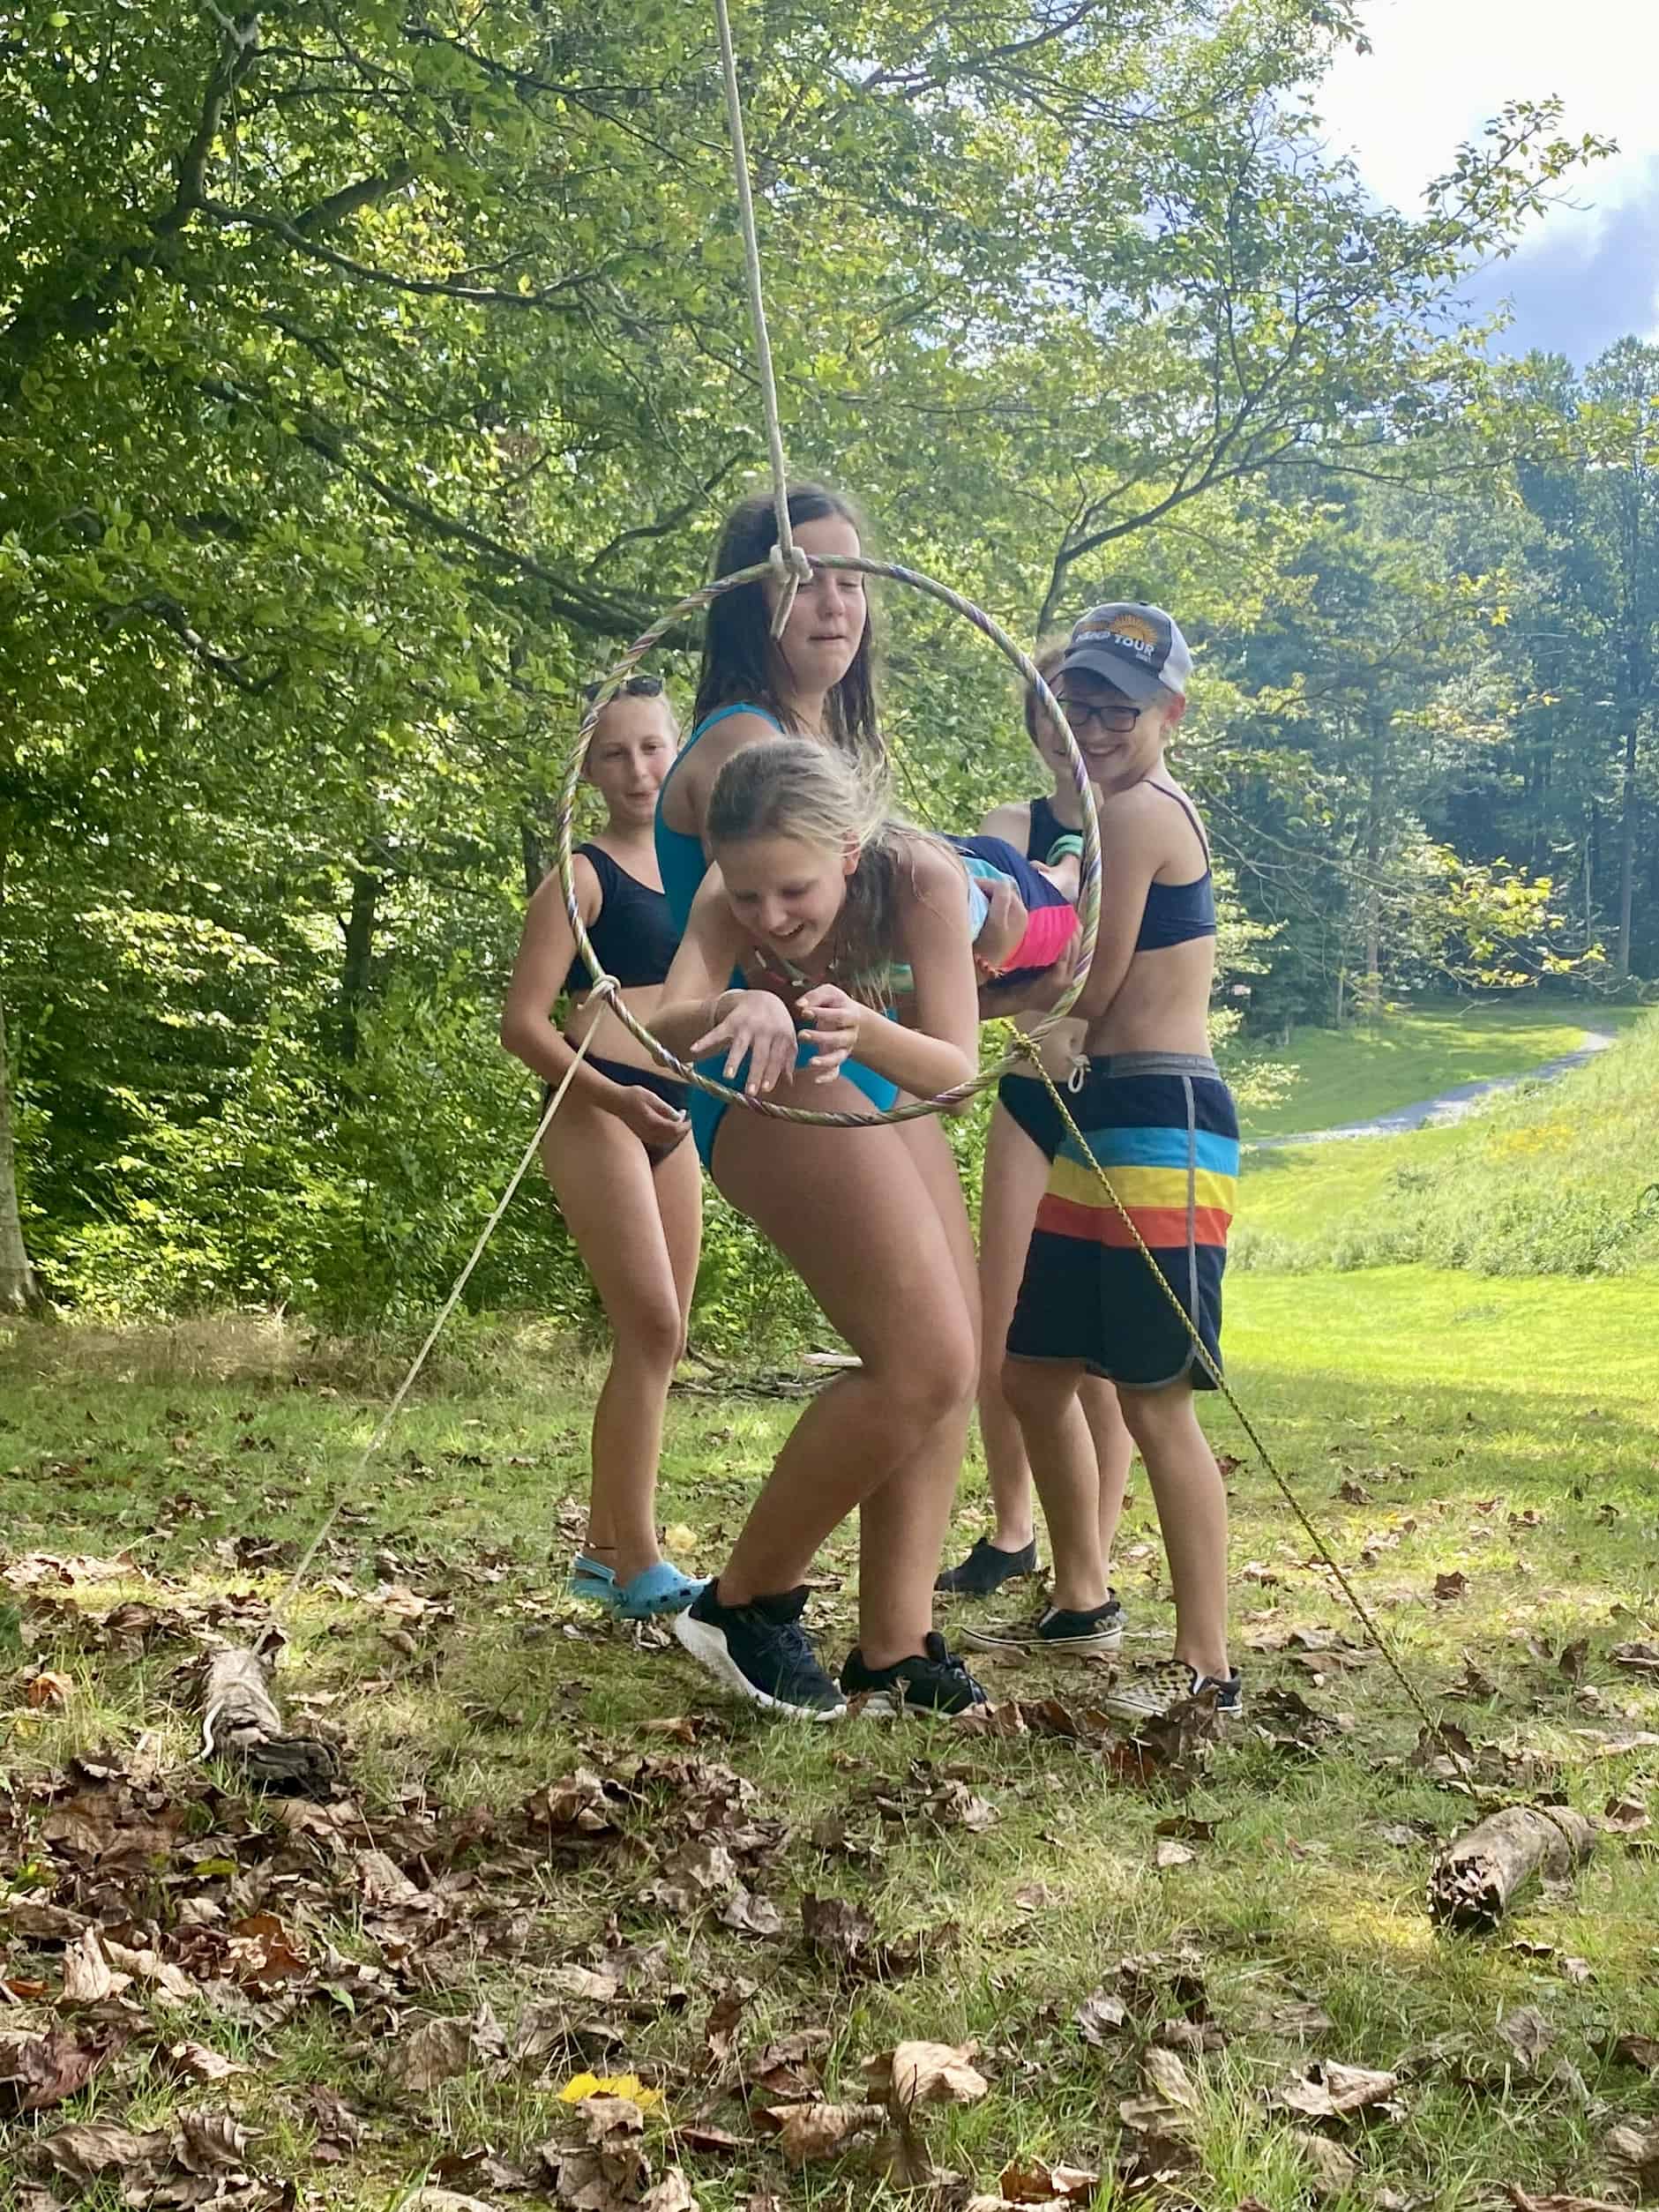 Campers playing a game with a hula hoop